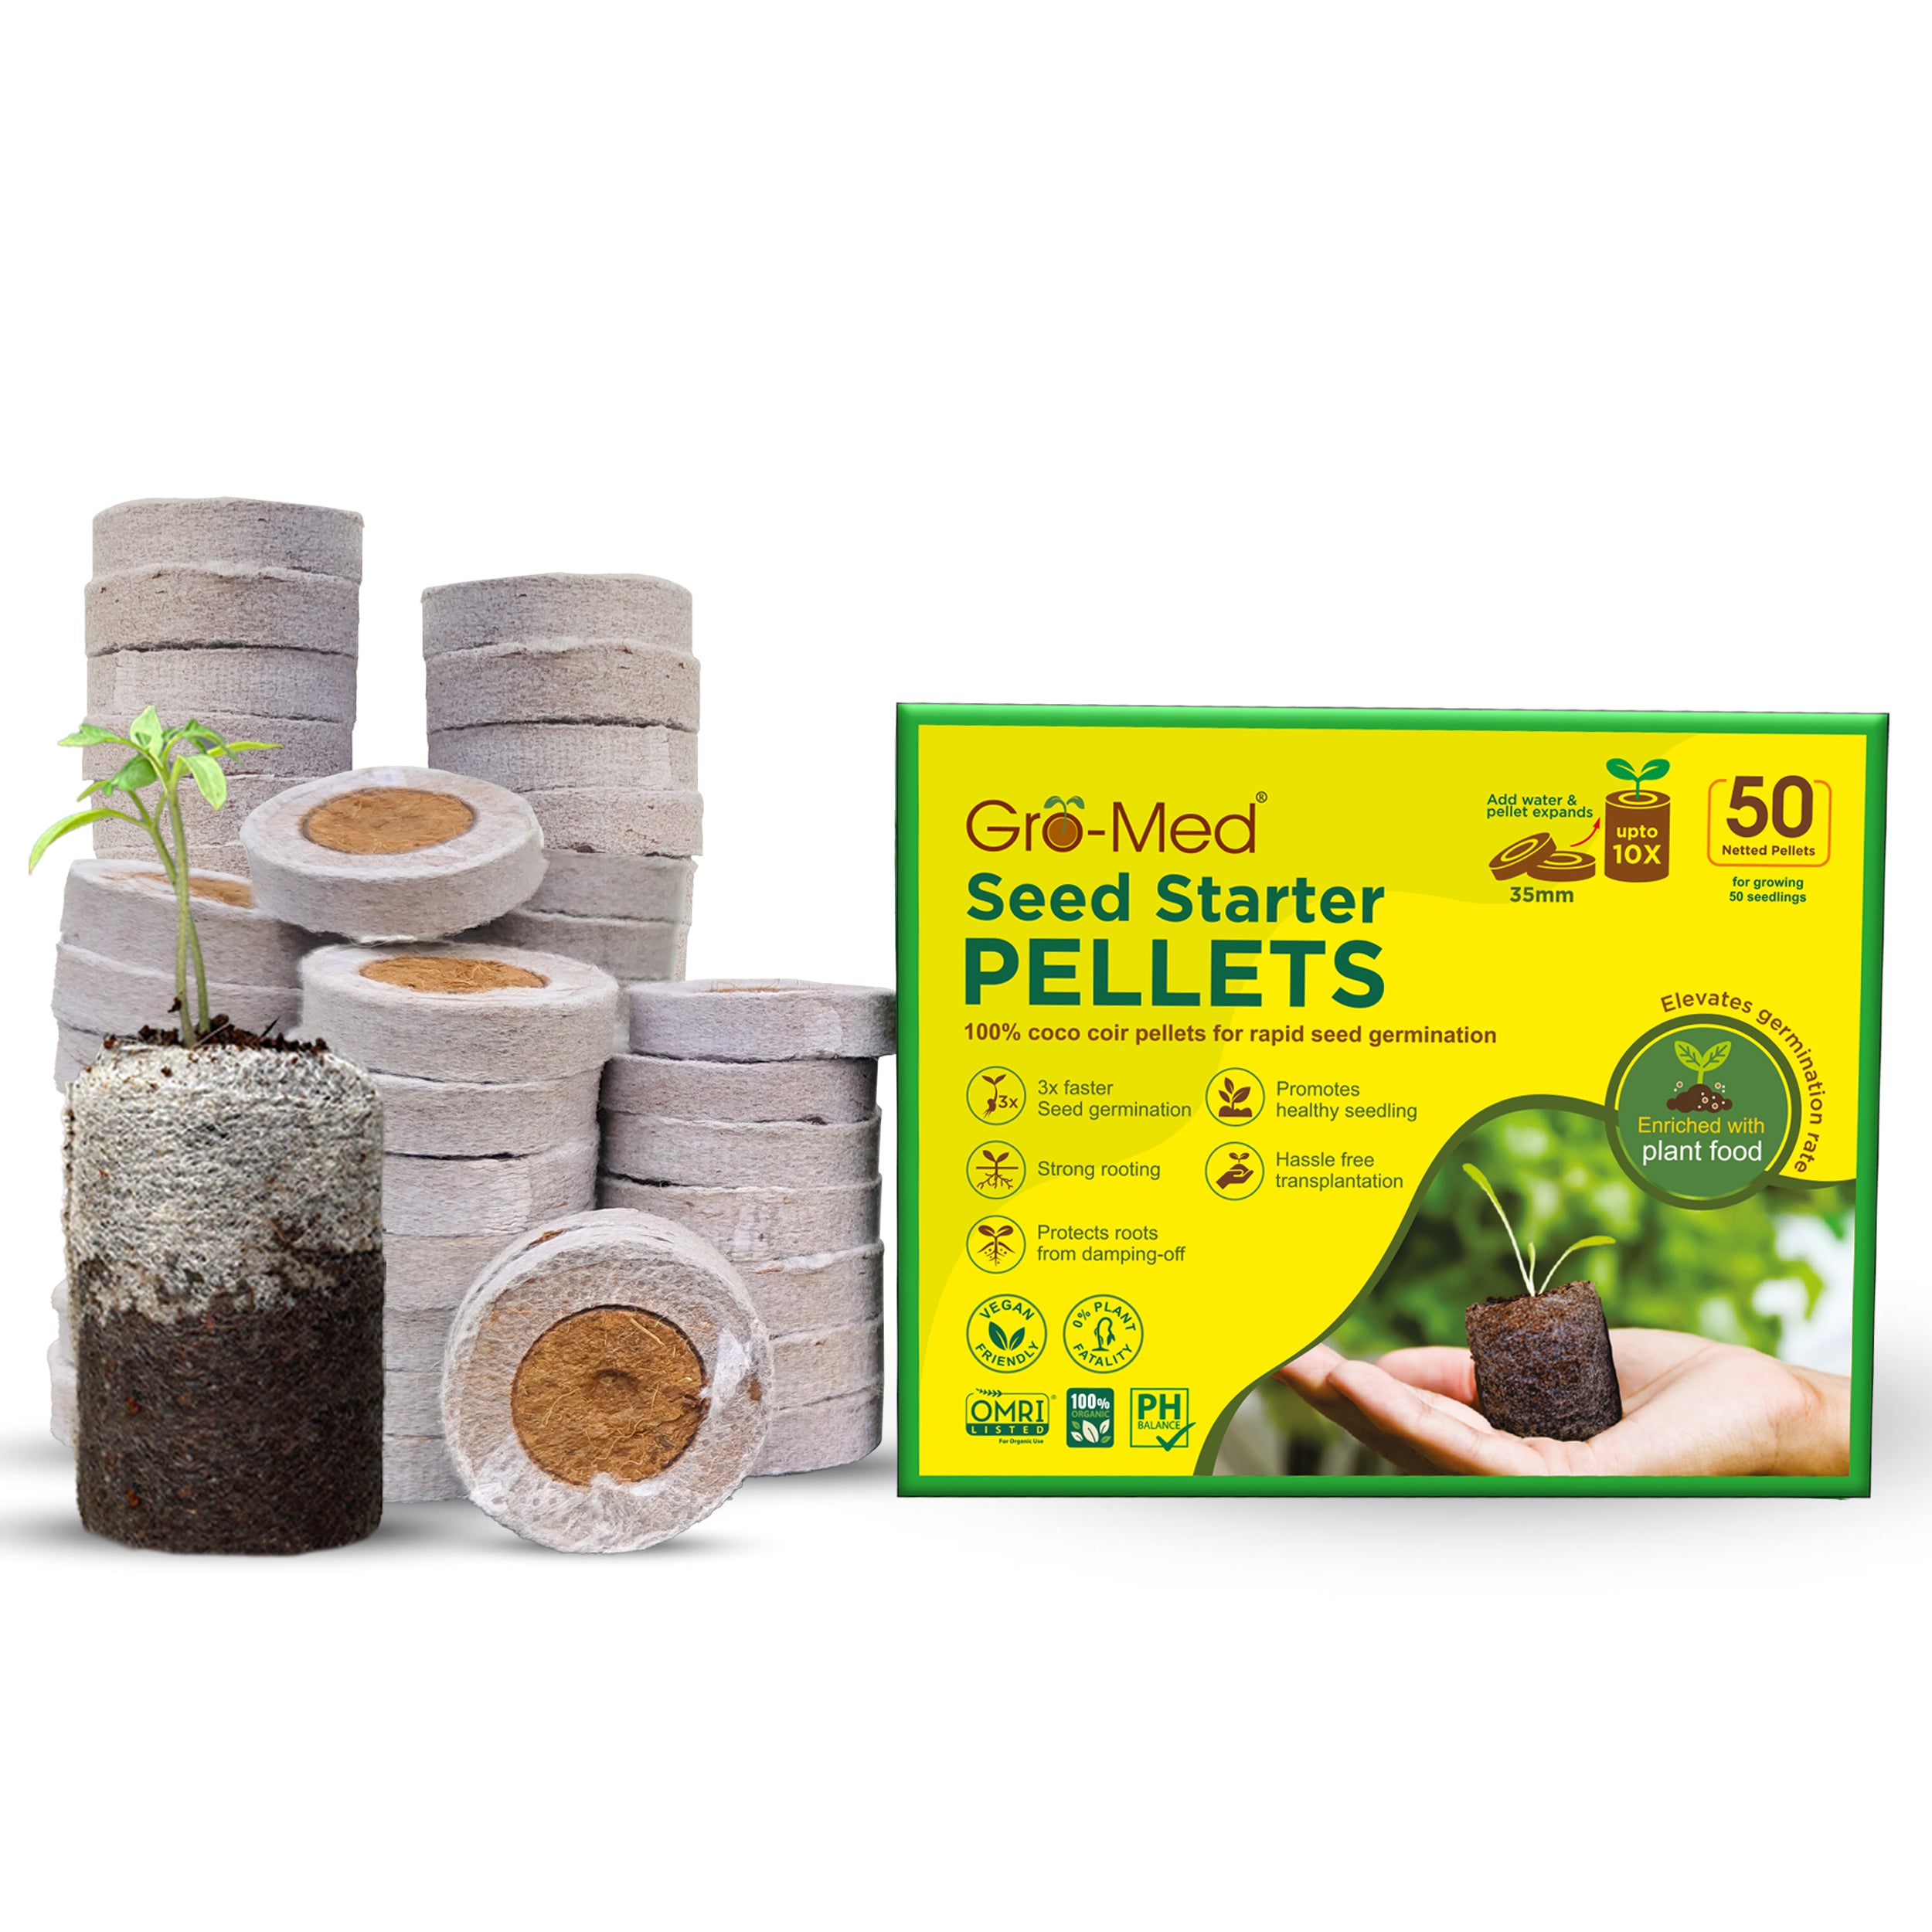 Seed Starter Pellets 35mm Enriched with Plant Food Pack of 50 Pieces